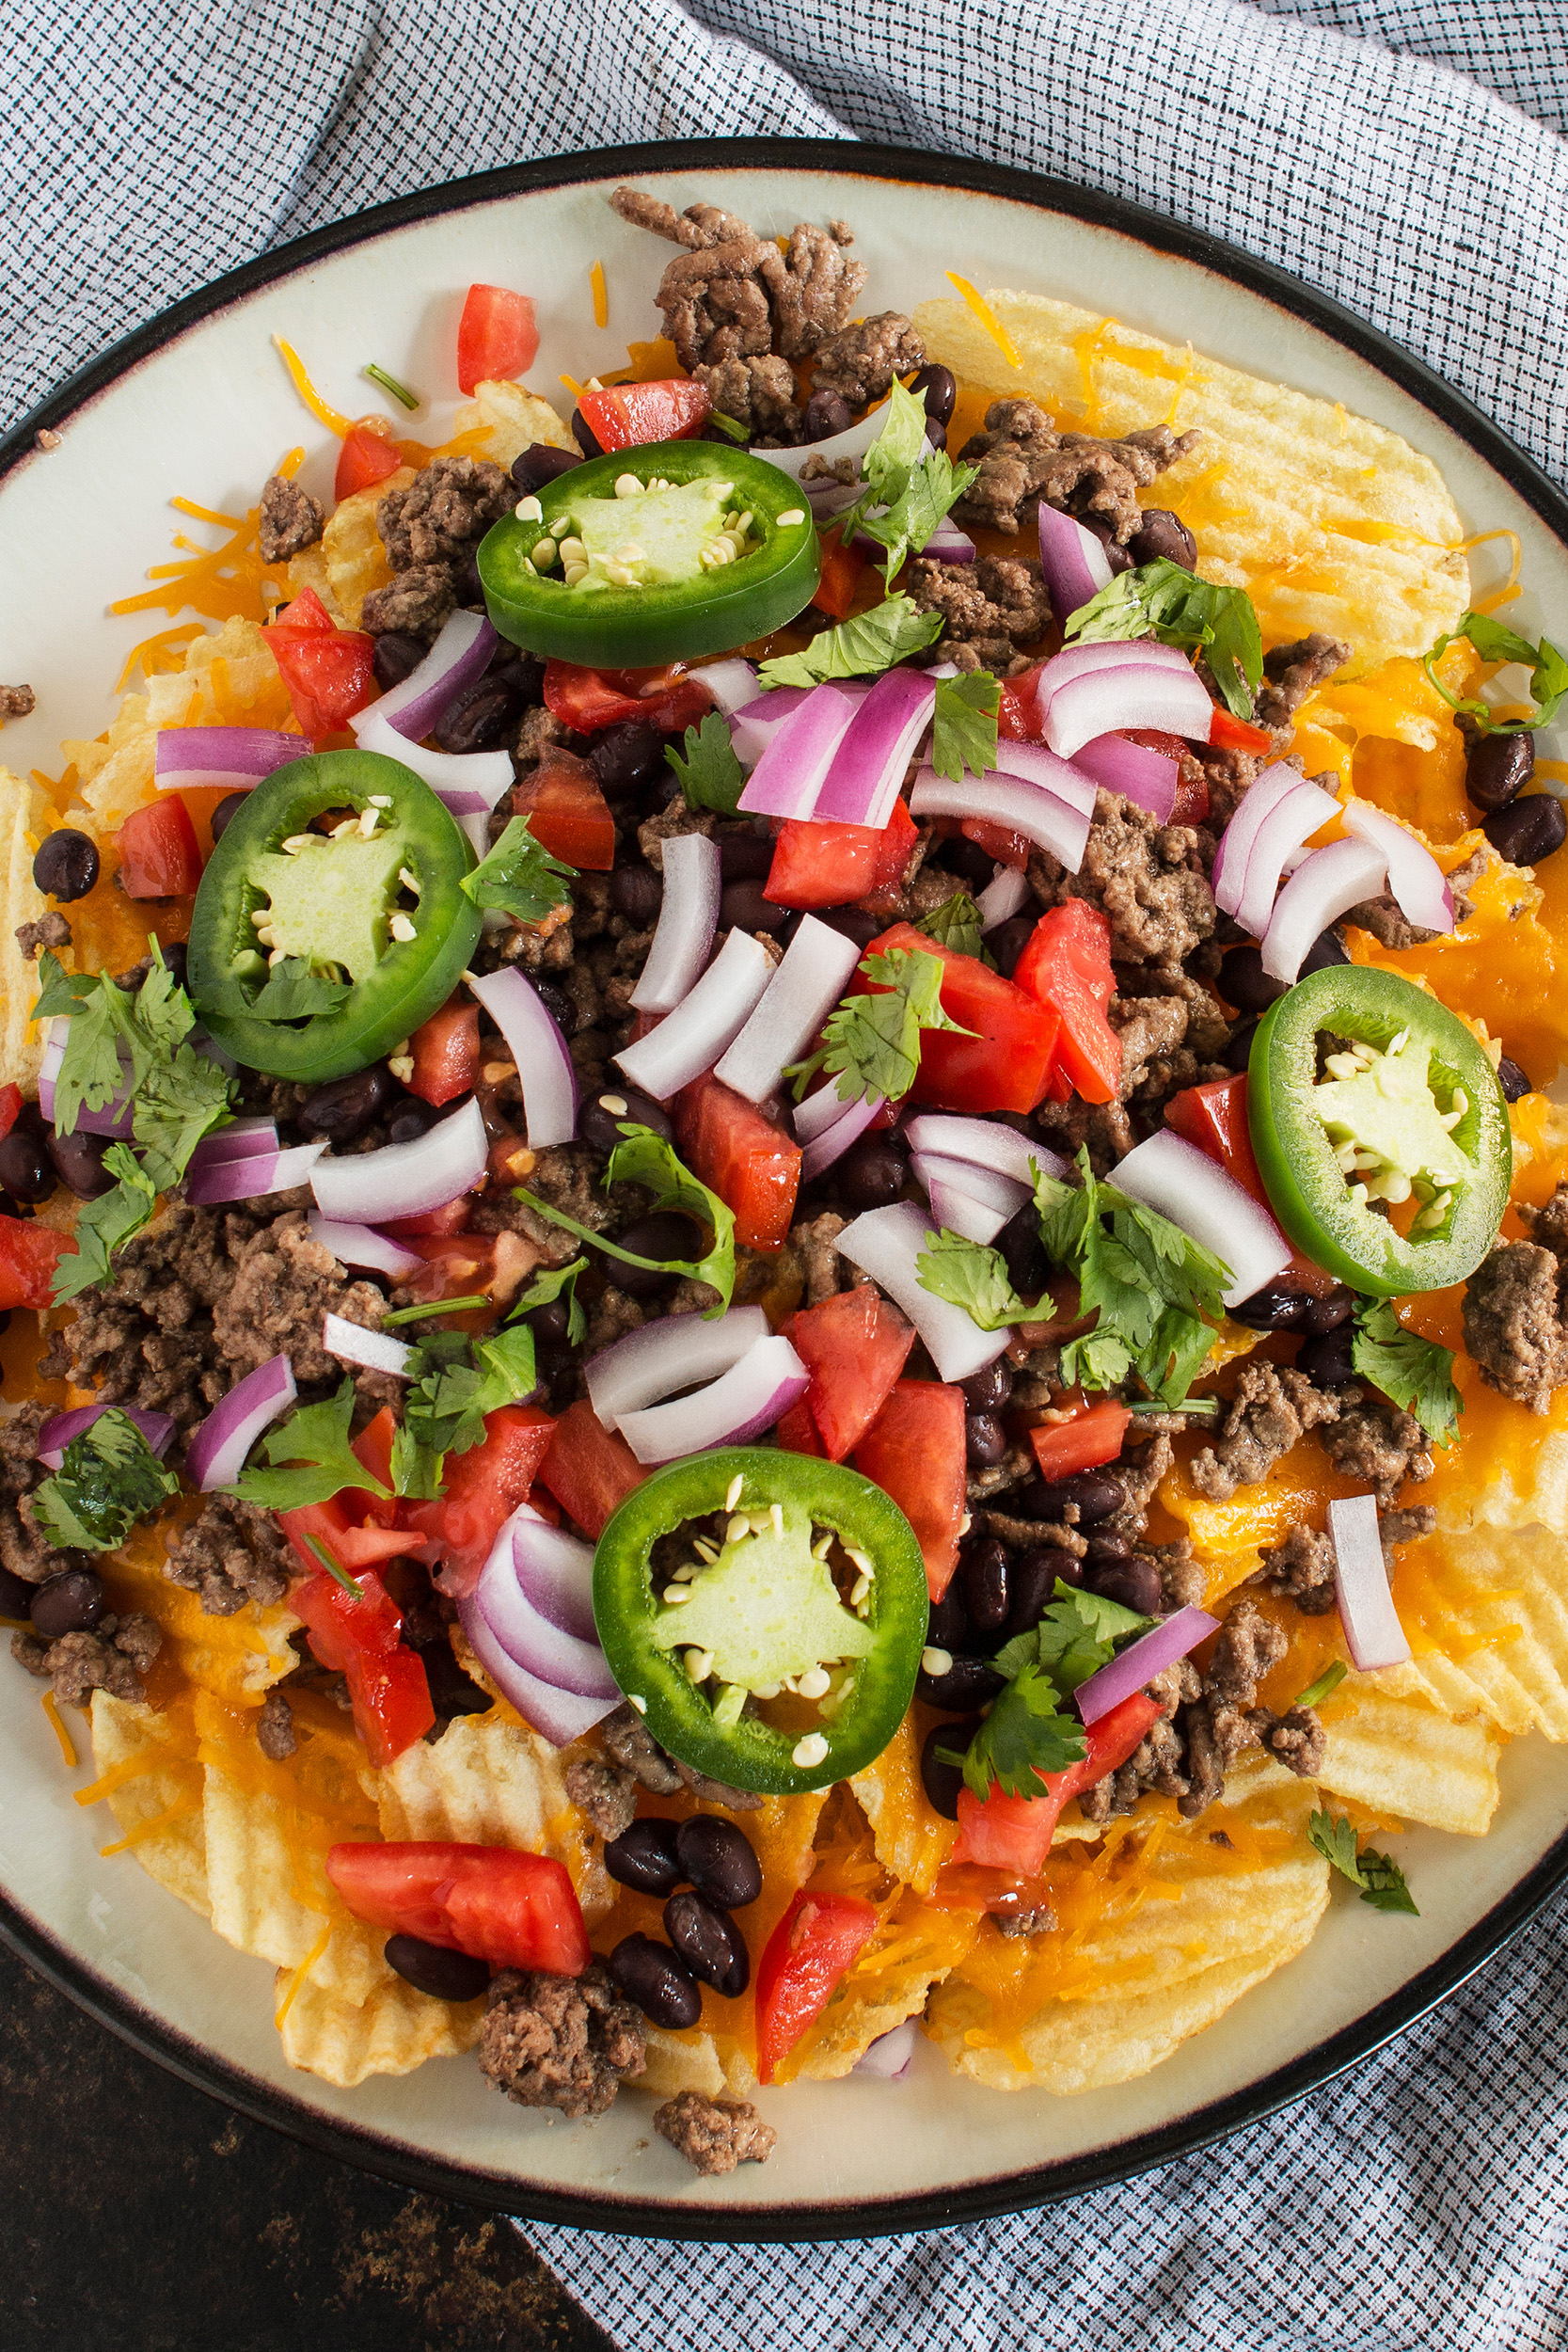 Irish nachos topped with jalapeños red onion ground beef cheese and black beans